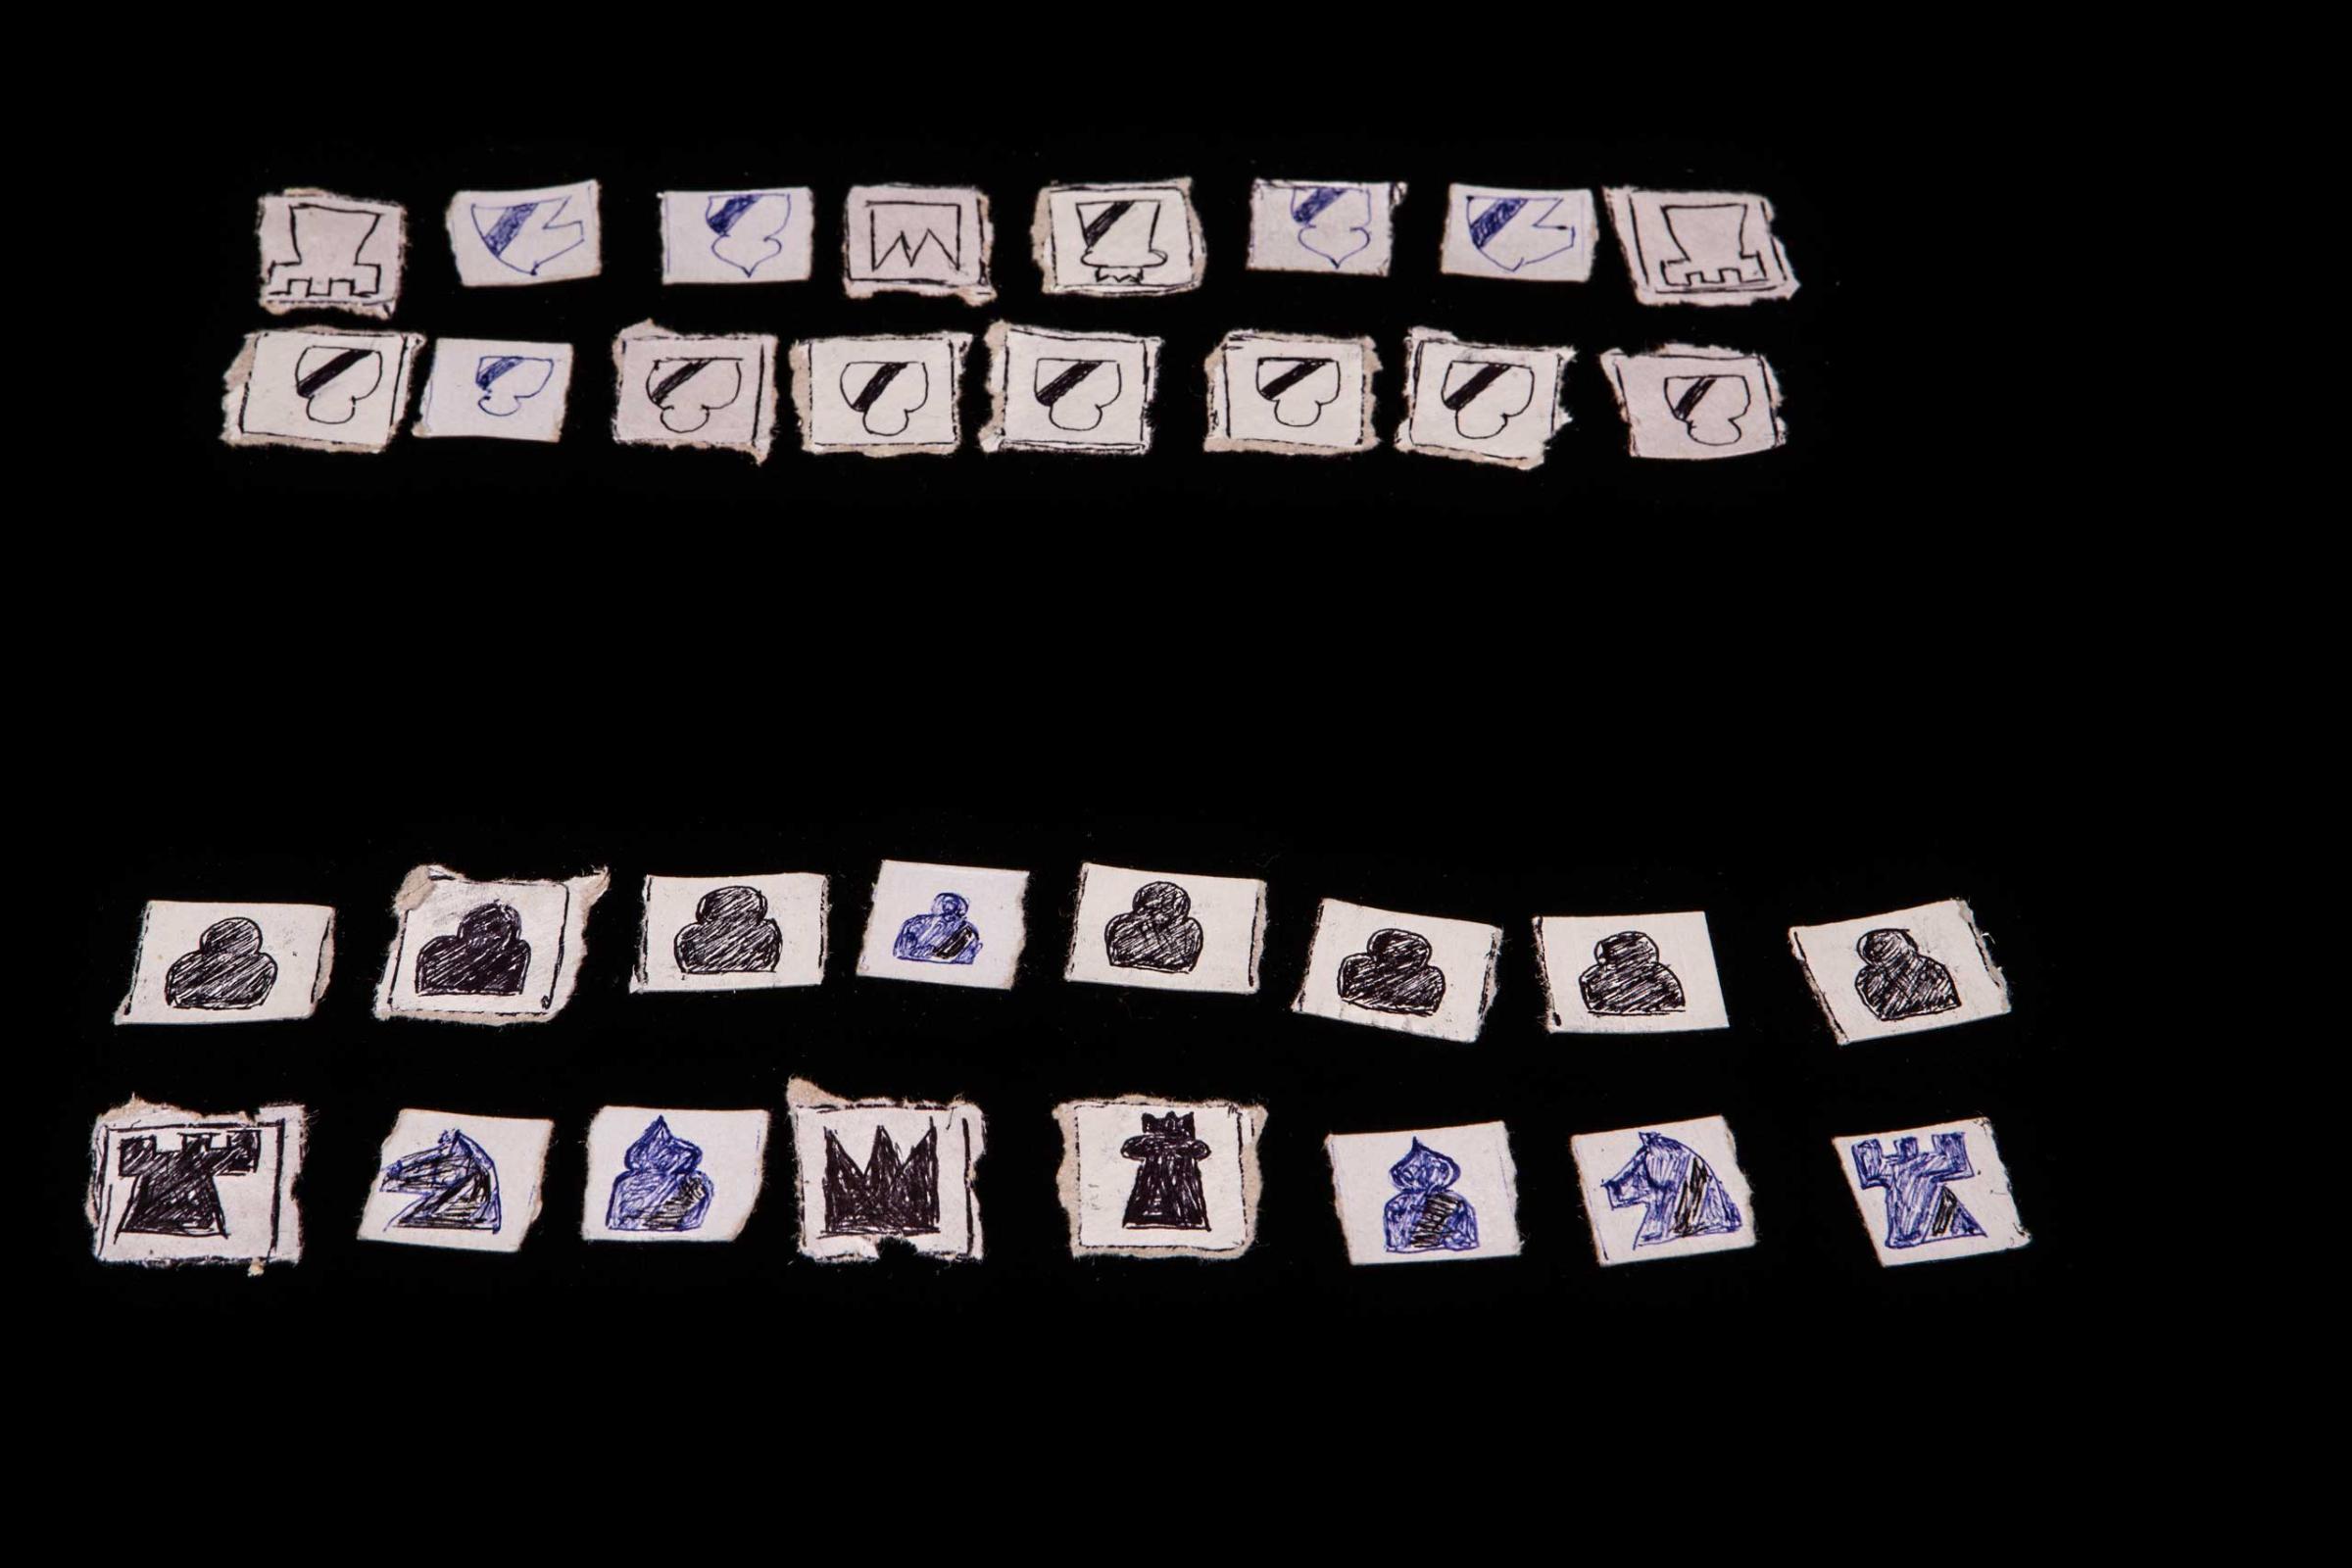 The chess set made by the group of Western hostages held in Northern Syria by ISIS, Aug 8, 2014.